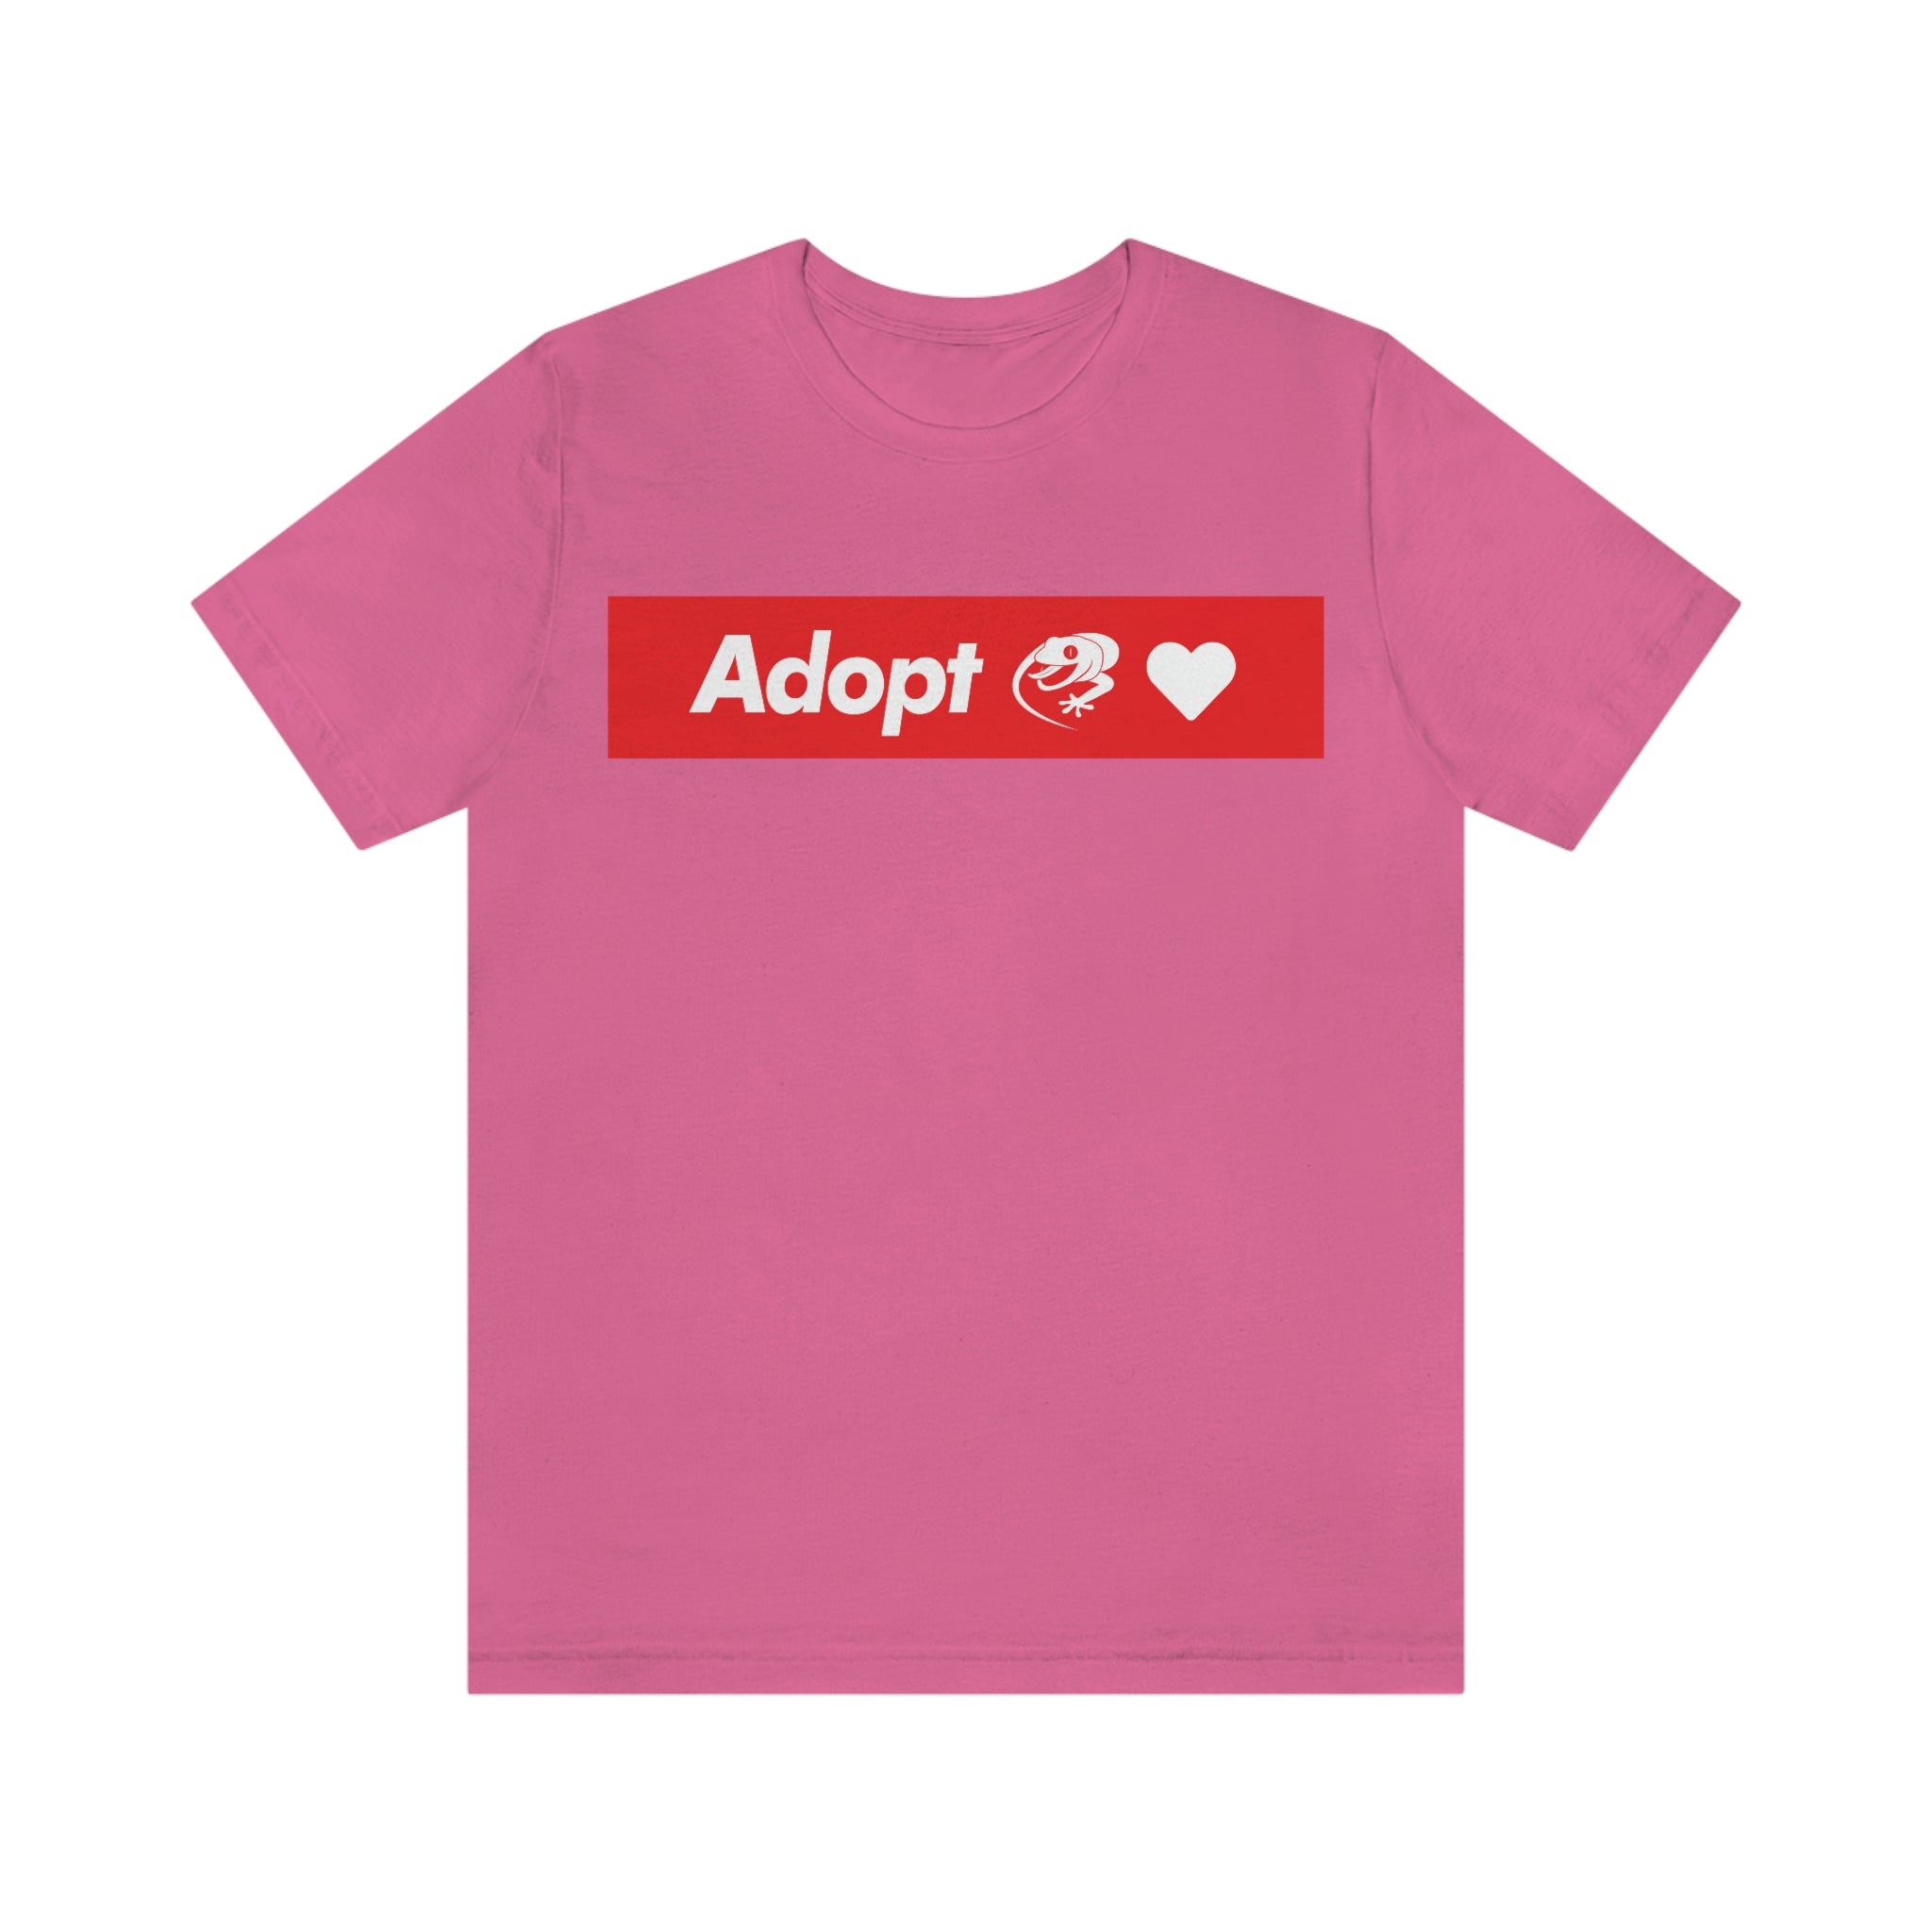 Adopt Love Rescue Gecko - RED BANNER : Unisex 100% Comfy Cotton T-Shirt Supporting Humane Animal Shelters